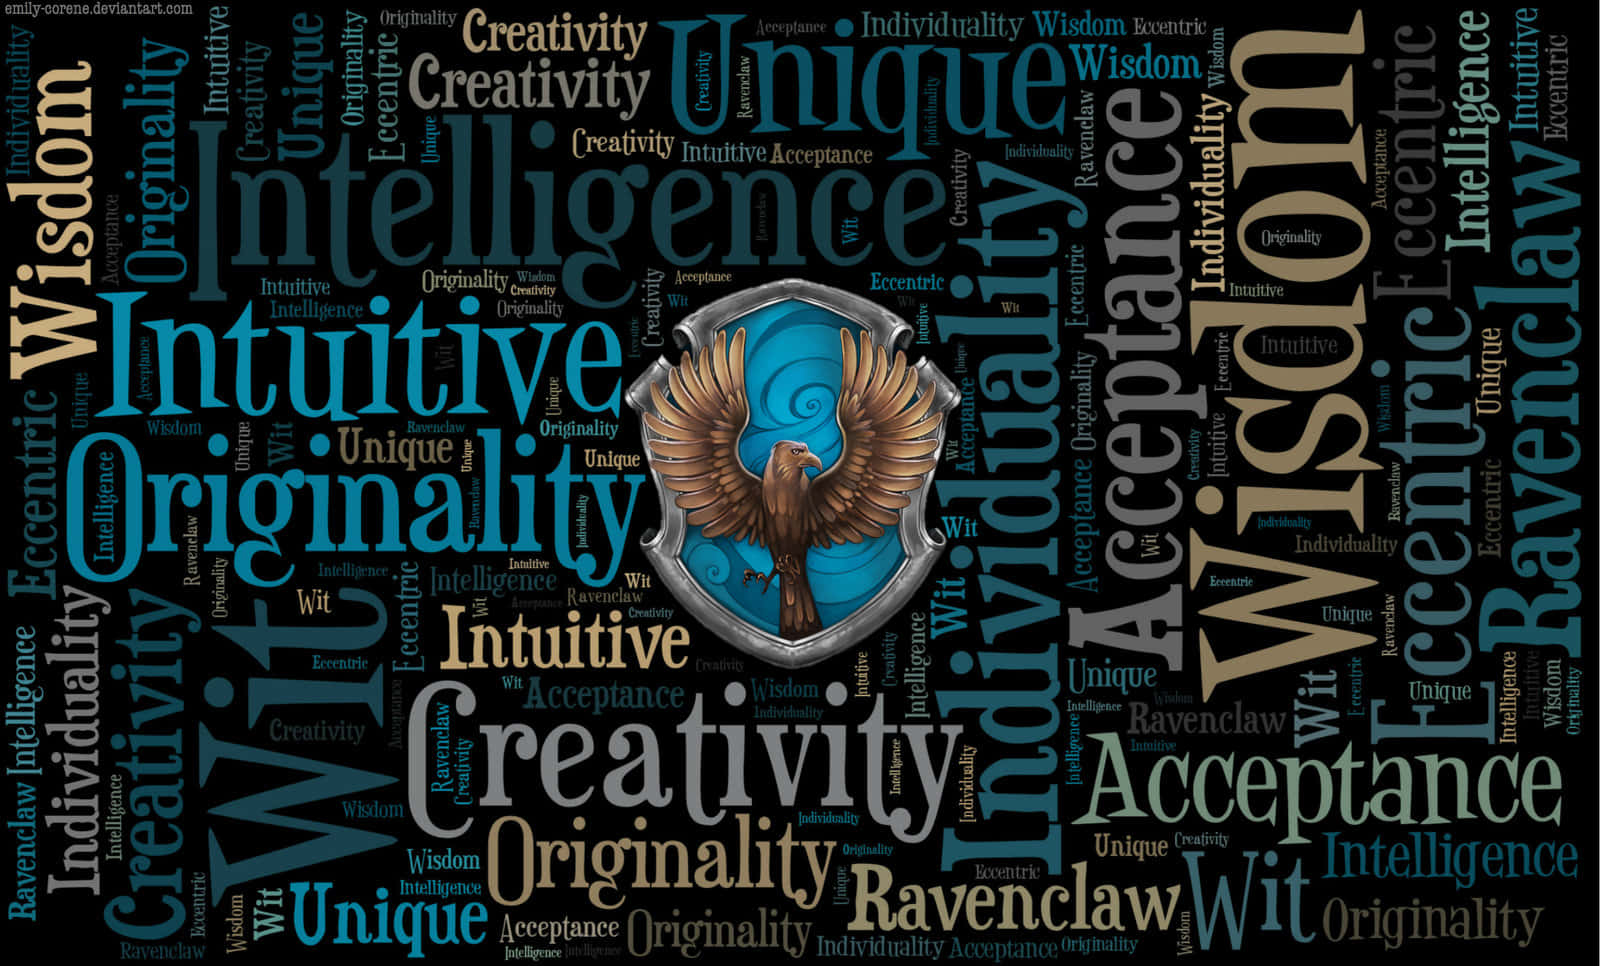 A representation of the Hogwarts House of Ravenclaw.